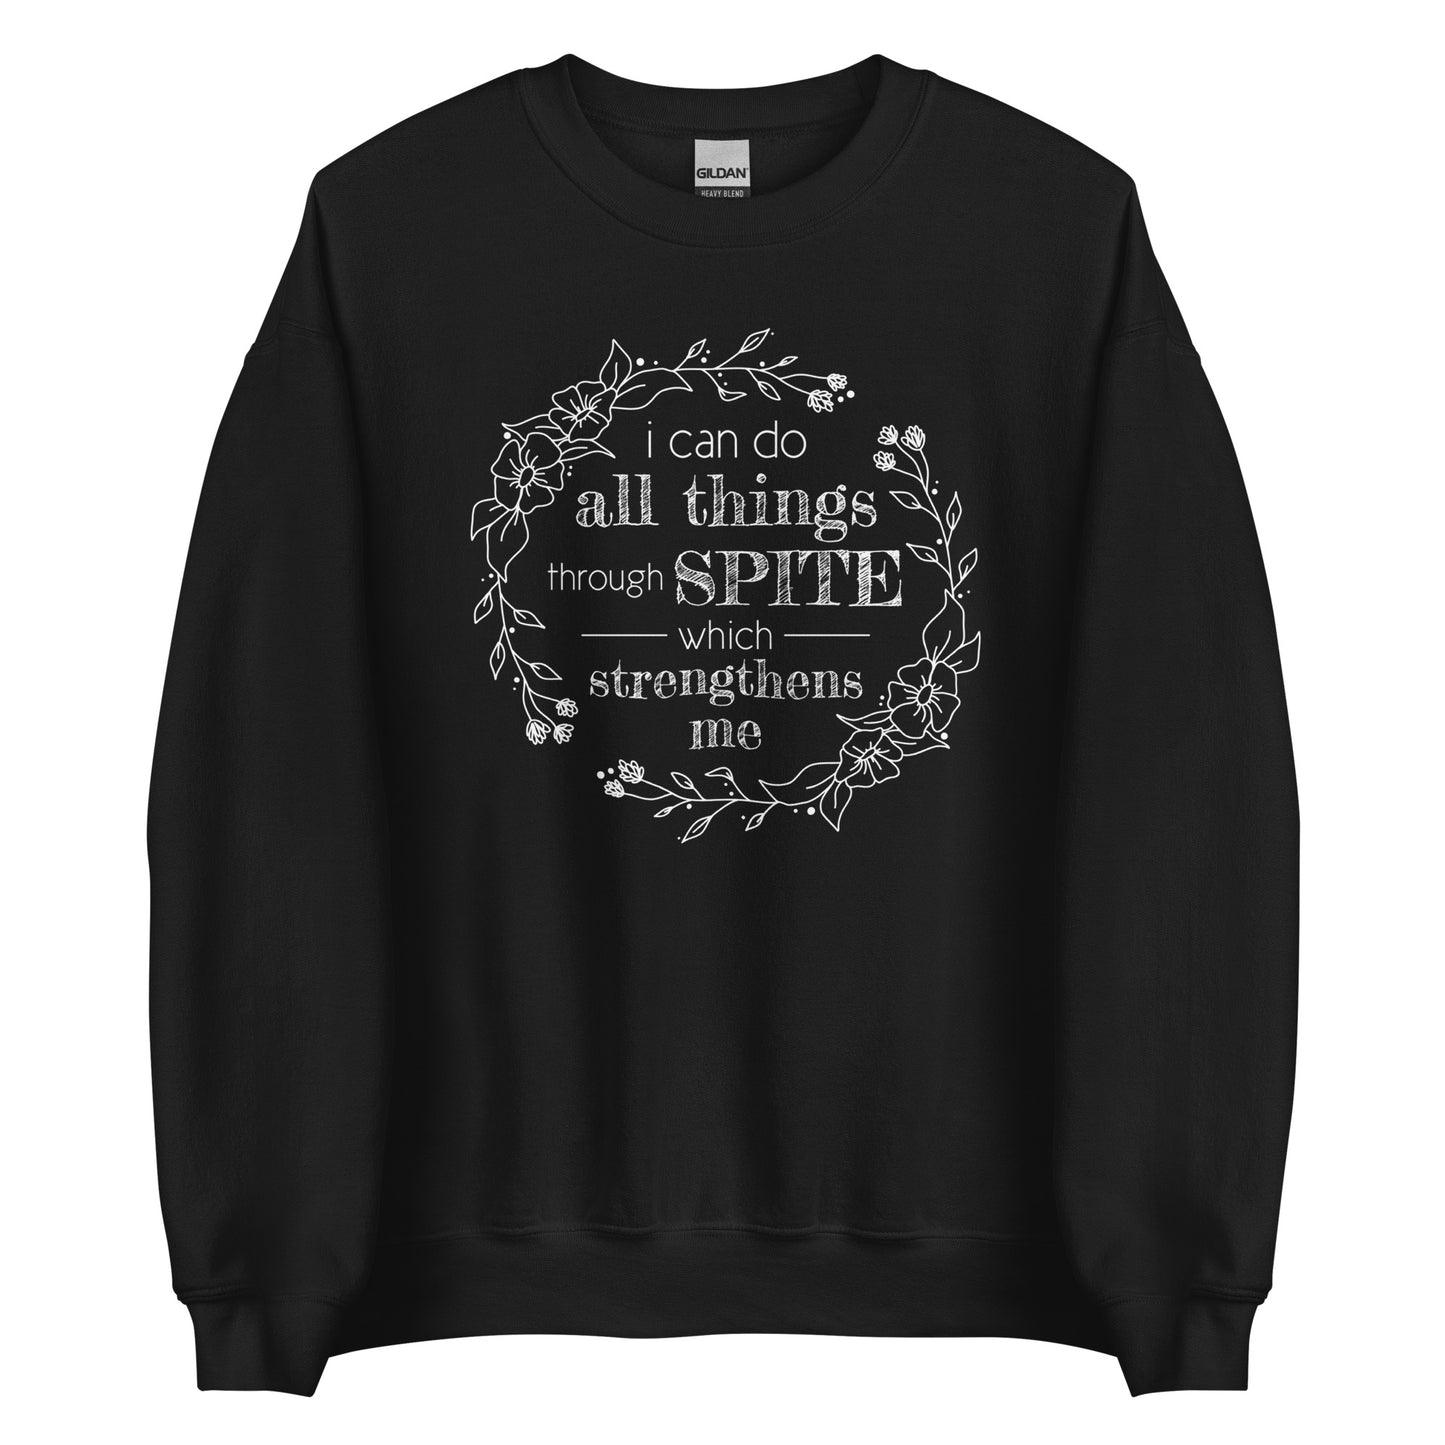 A black crewneck sweatshirt featuring an illustration of a floral wreath. Text inside the flowers reads "i can do all things through SPITE which strengthens me"